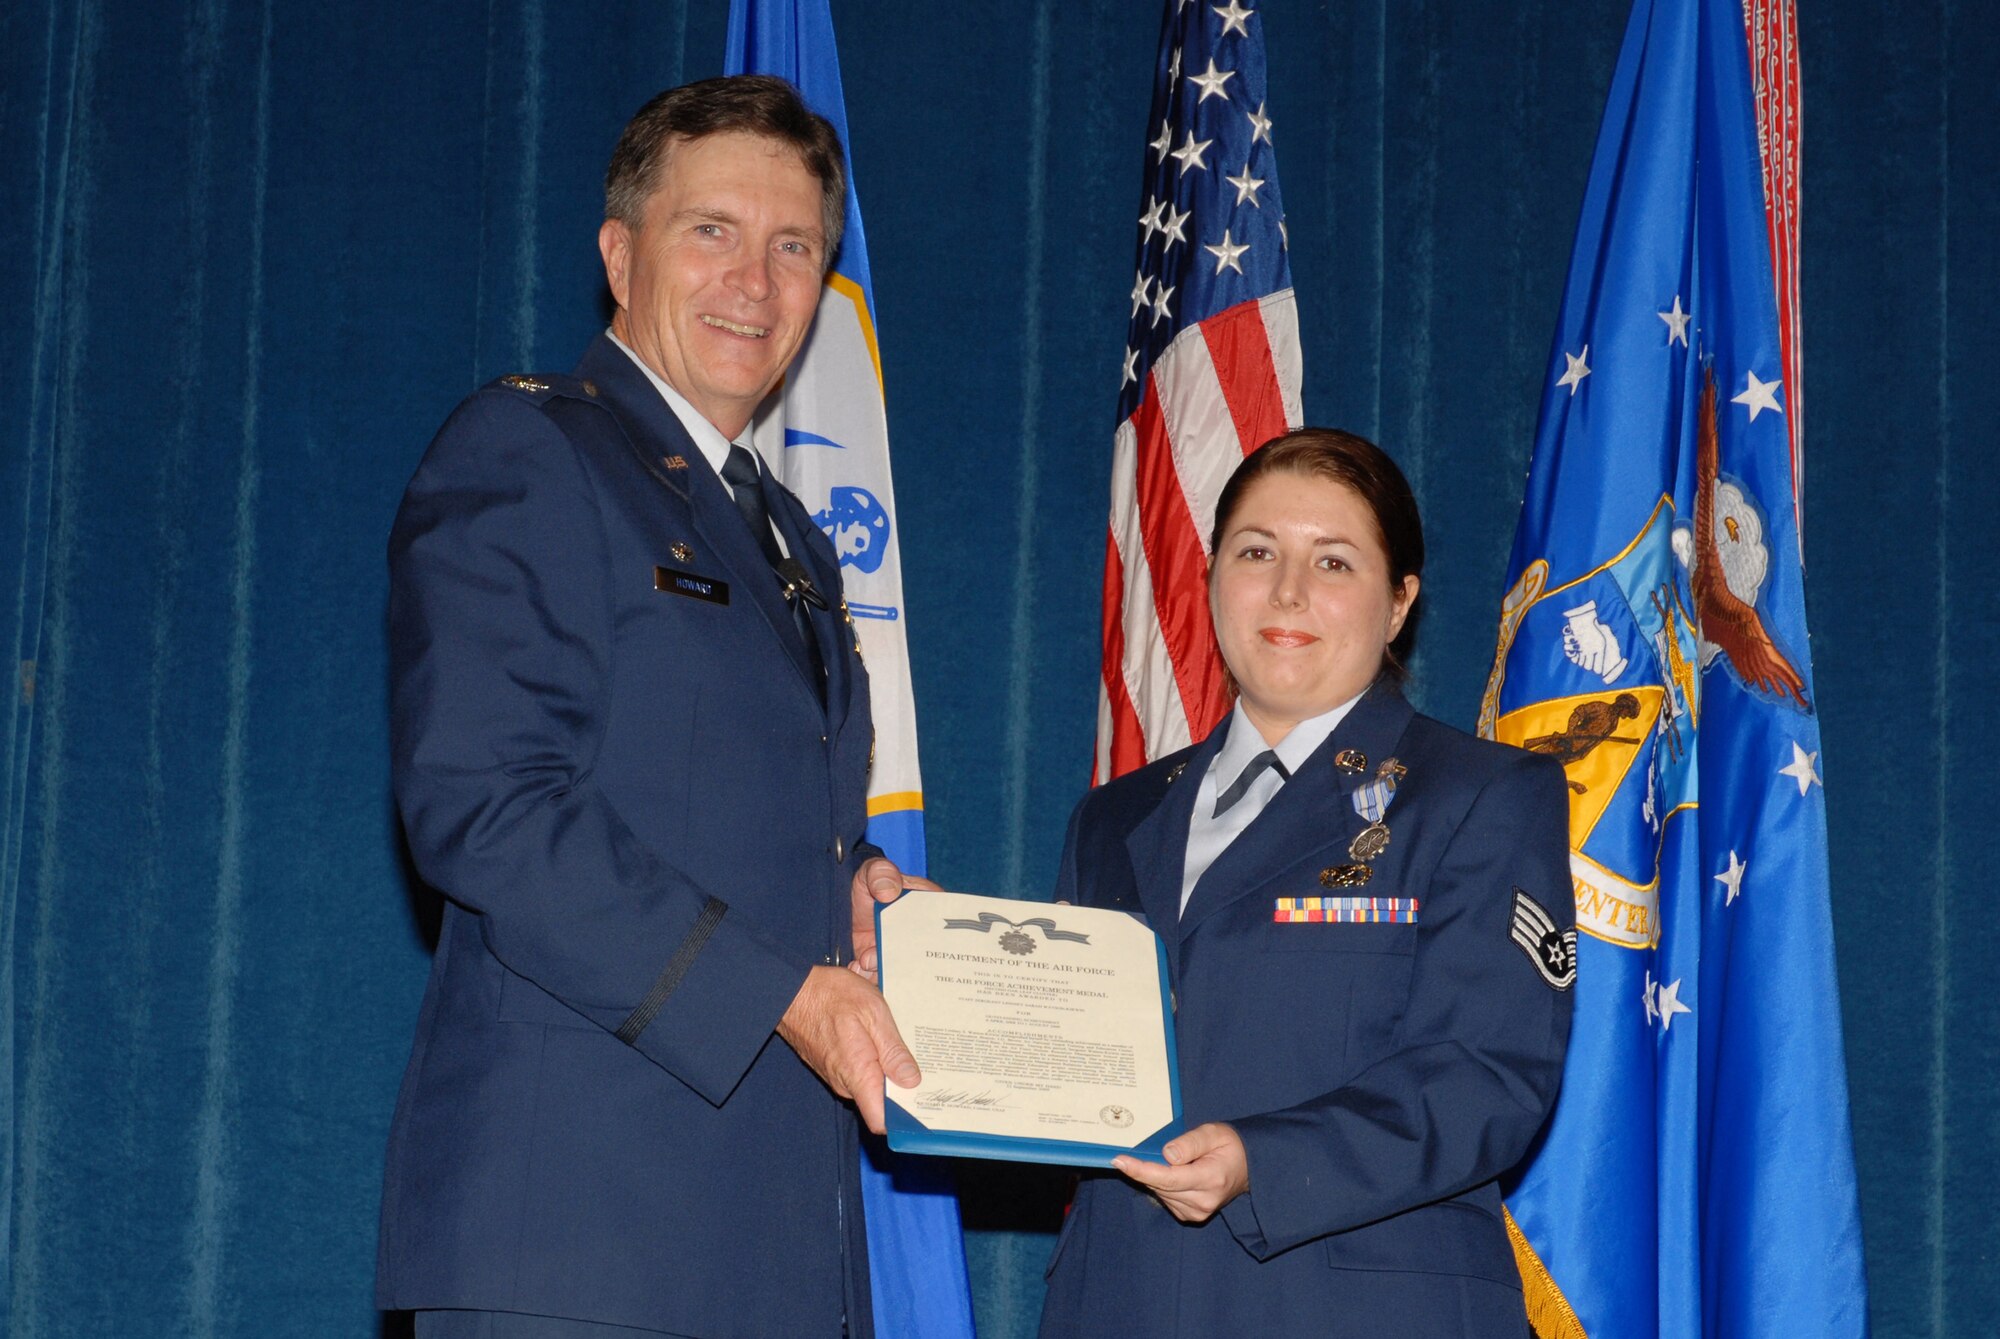 McGHEE TYSON ANGB, Tenn. -- Col. Richard B. Howard, commander, presents the Air Force Achievement Medal to Staff Sgt. Lindsey Sarah Watson-Kirwin, a public affairs journalist with the 134th Air Refueling Wing who is assisting the Transformative Education branch as a curriculum developer, during commander's call on the campus of The I.G. Brown Air National Guard Training and Education Center here, Sept. 25, 2009.  Watson-Kirwin distinguished herself from April 6 to Aug. 1, 2009 while assigned to the Training and Education Center. (U.S. Air Force photograph by Master Sgt. Mavi Smith)